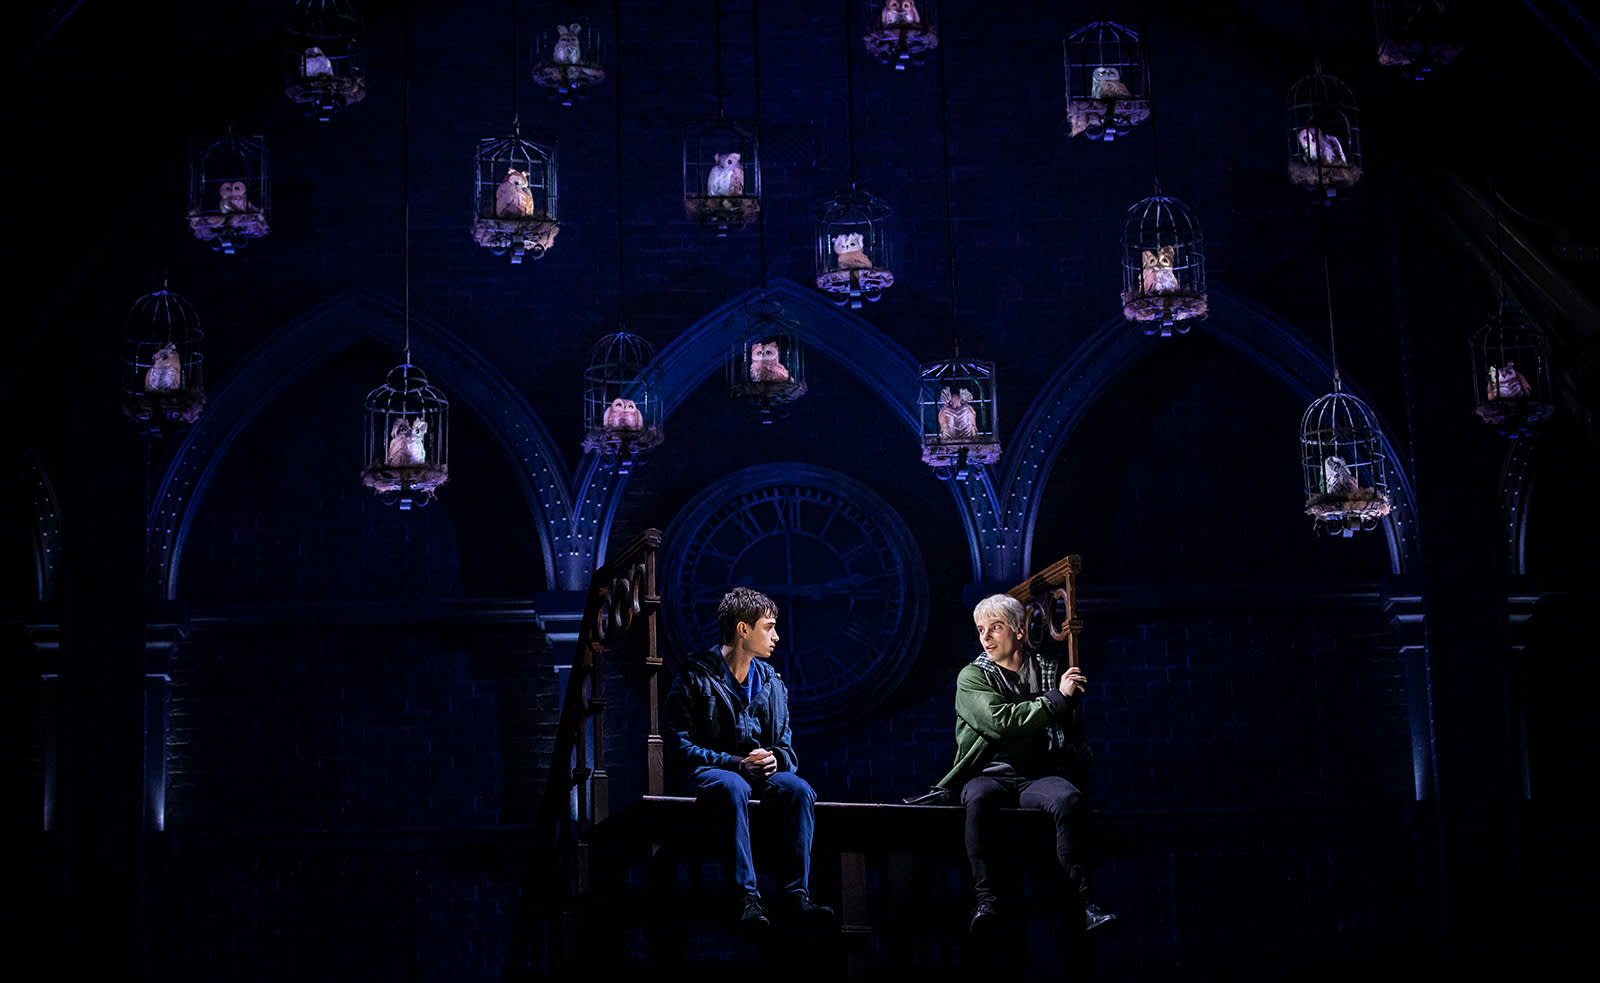 Pictured (L–R): Benjamin Papac as Albus Potter and Jon Steiger as Scorpius Malfoy in the San Francisco production of Harry Potter and the Cursed Child Photo credit: Evan Zimmerman for MurphyMade